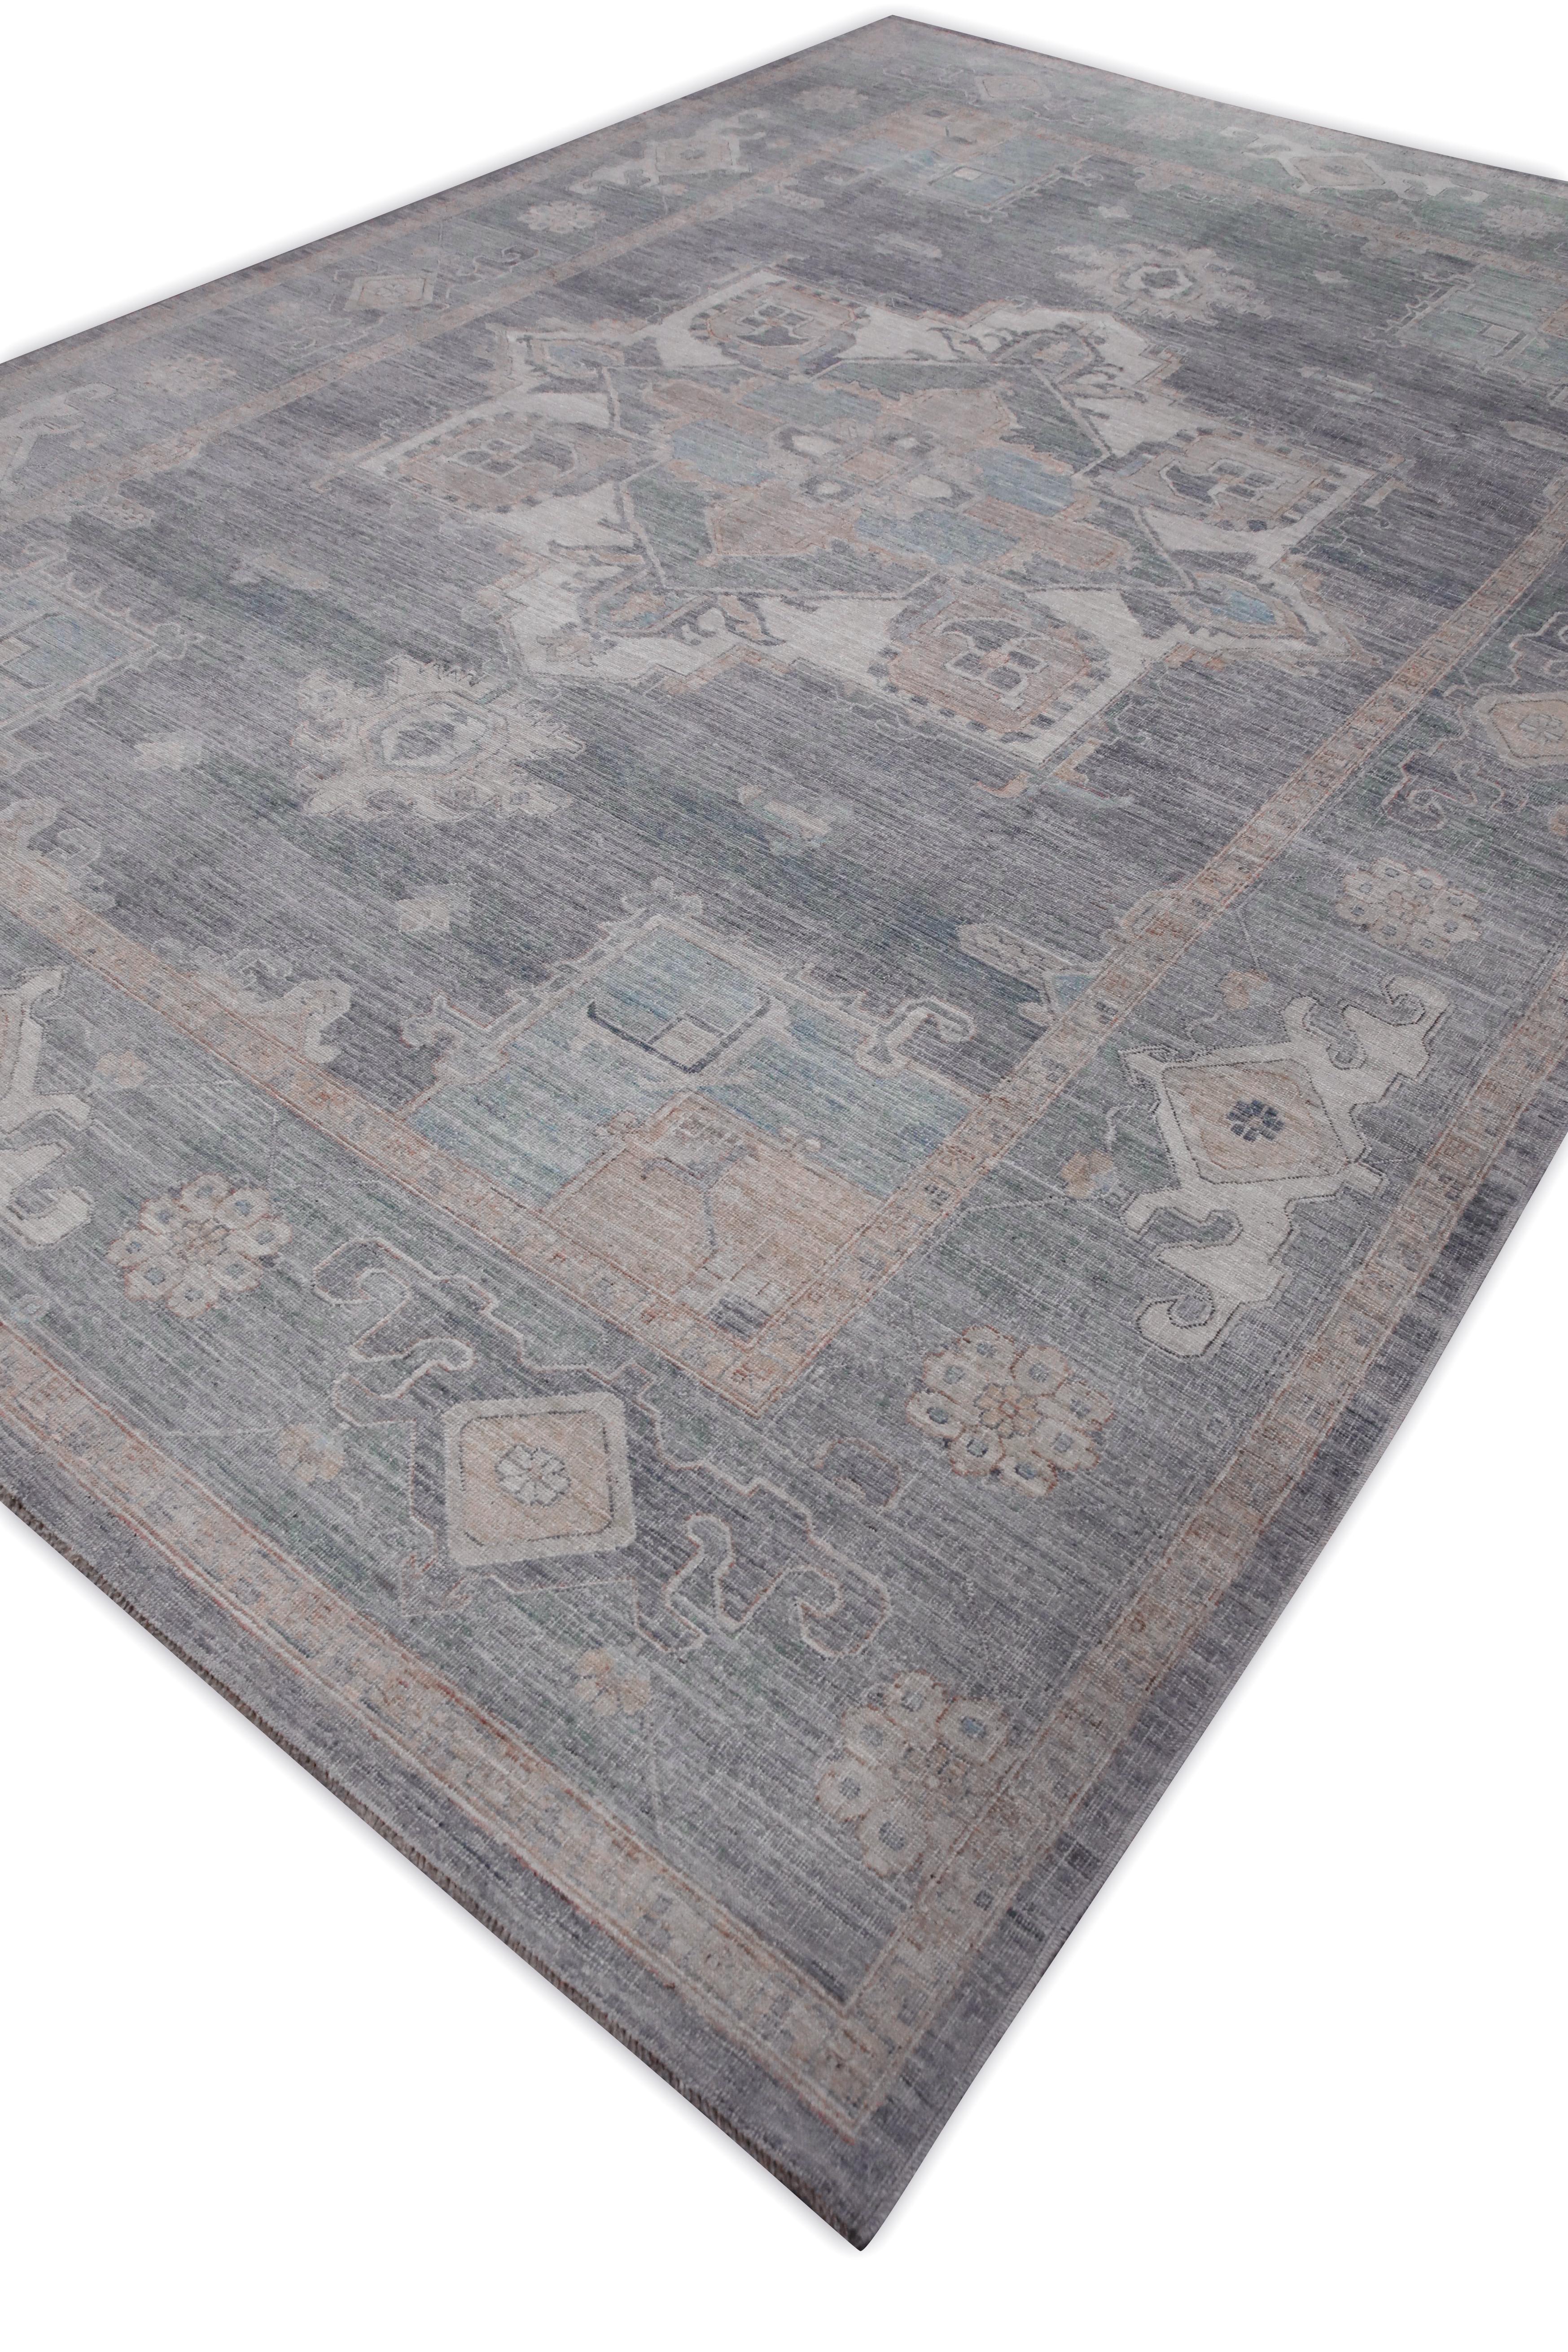 Contemporary Gray Multicolor Floral Design Handwoven Wool Turkish Oushak Rug 10'2